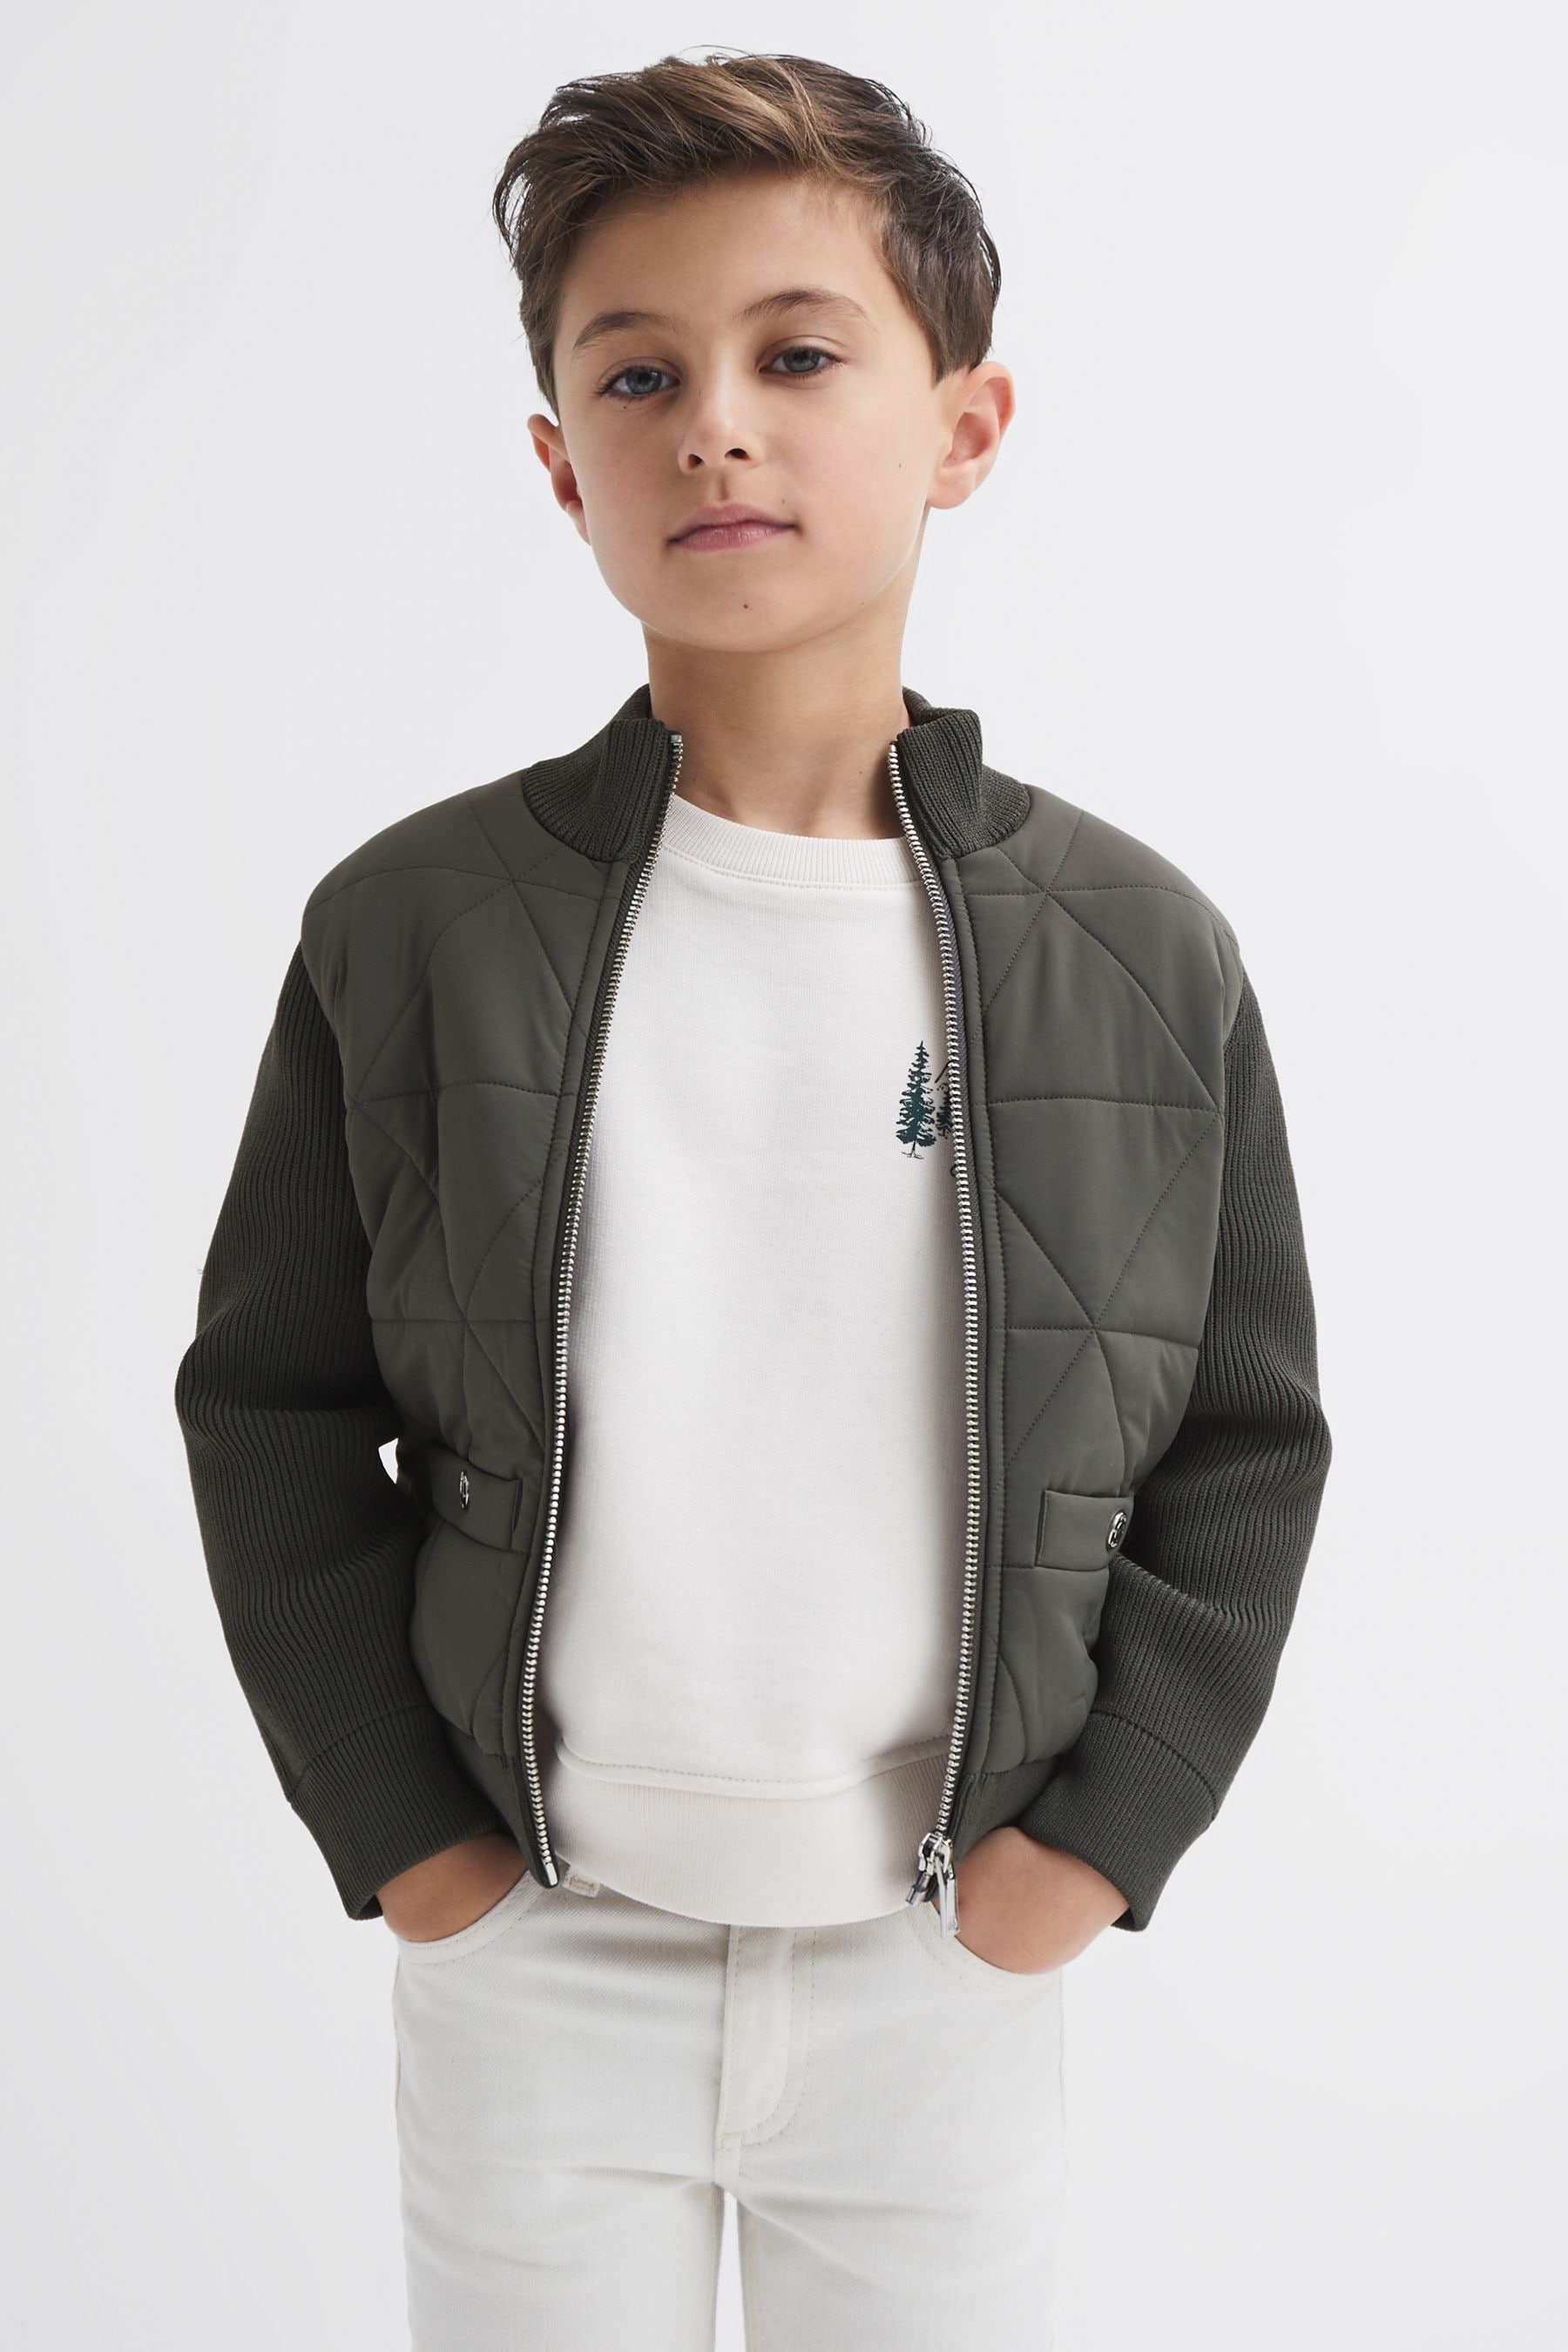 Reiss Amos - Forest Green Junior Hybrid Zip-through Quilted Jacket, Age 6-7 Years